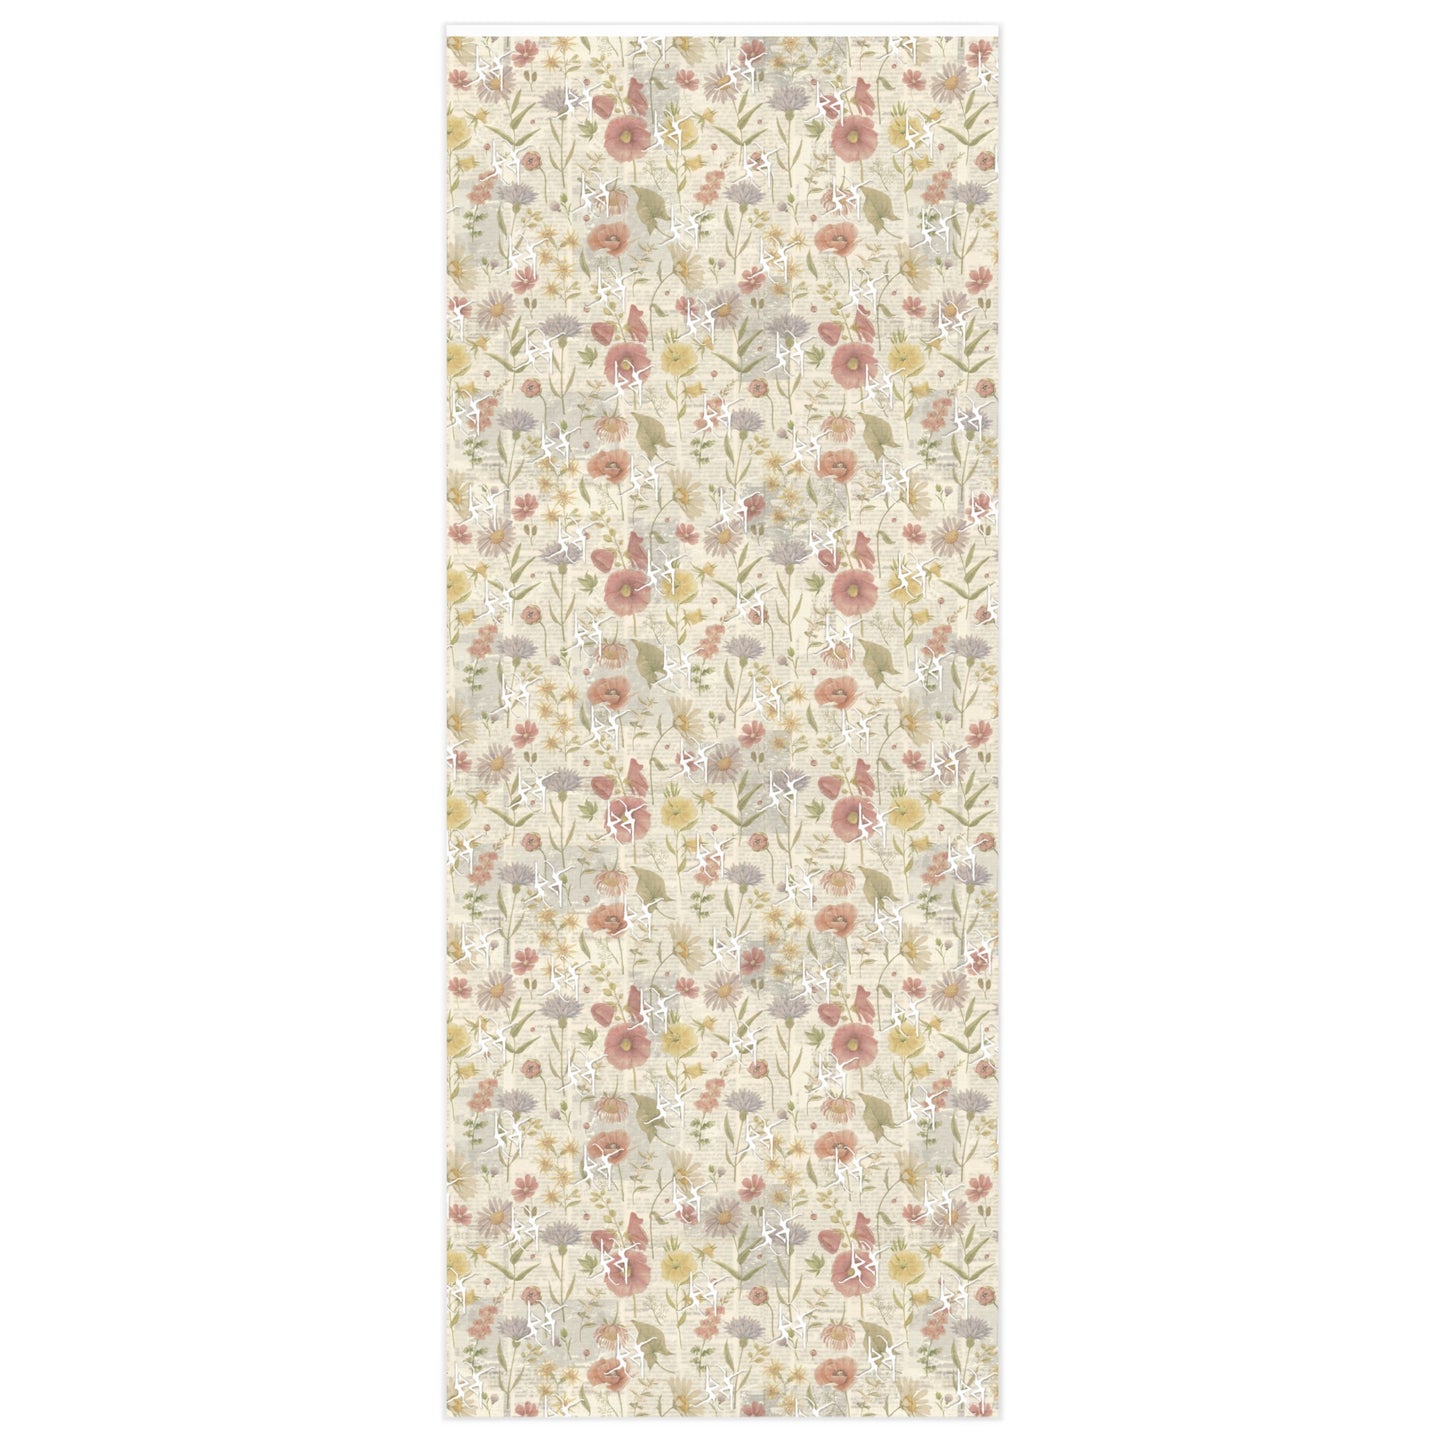 gift wrap -- wrapping paper -- DMB -- fd -- subtle DMB -- wildflowers -- pretty -- pastel